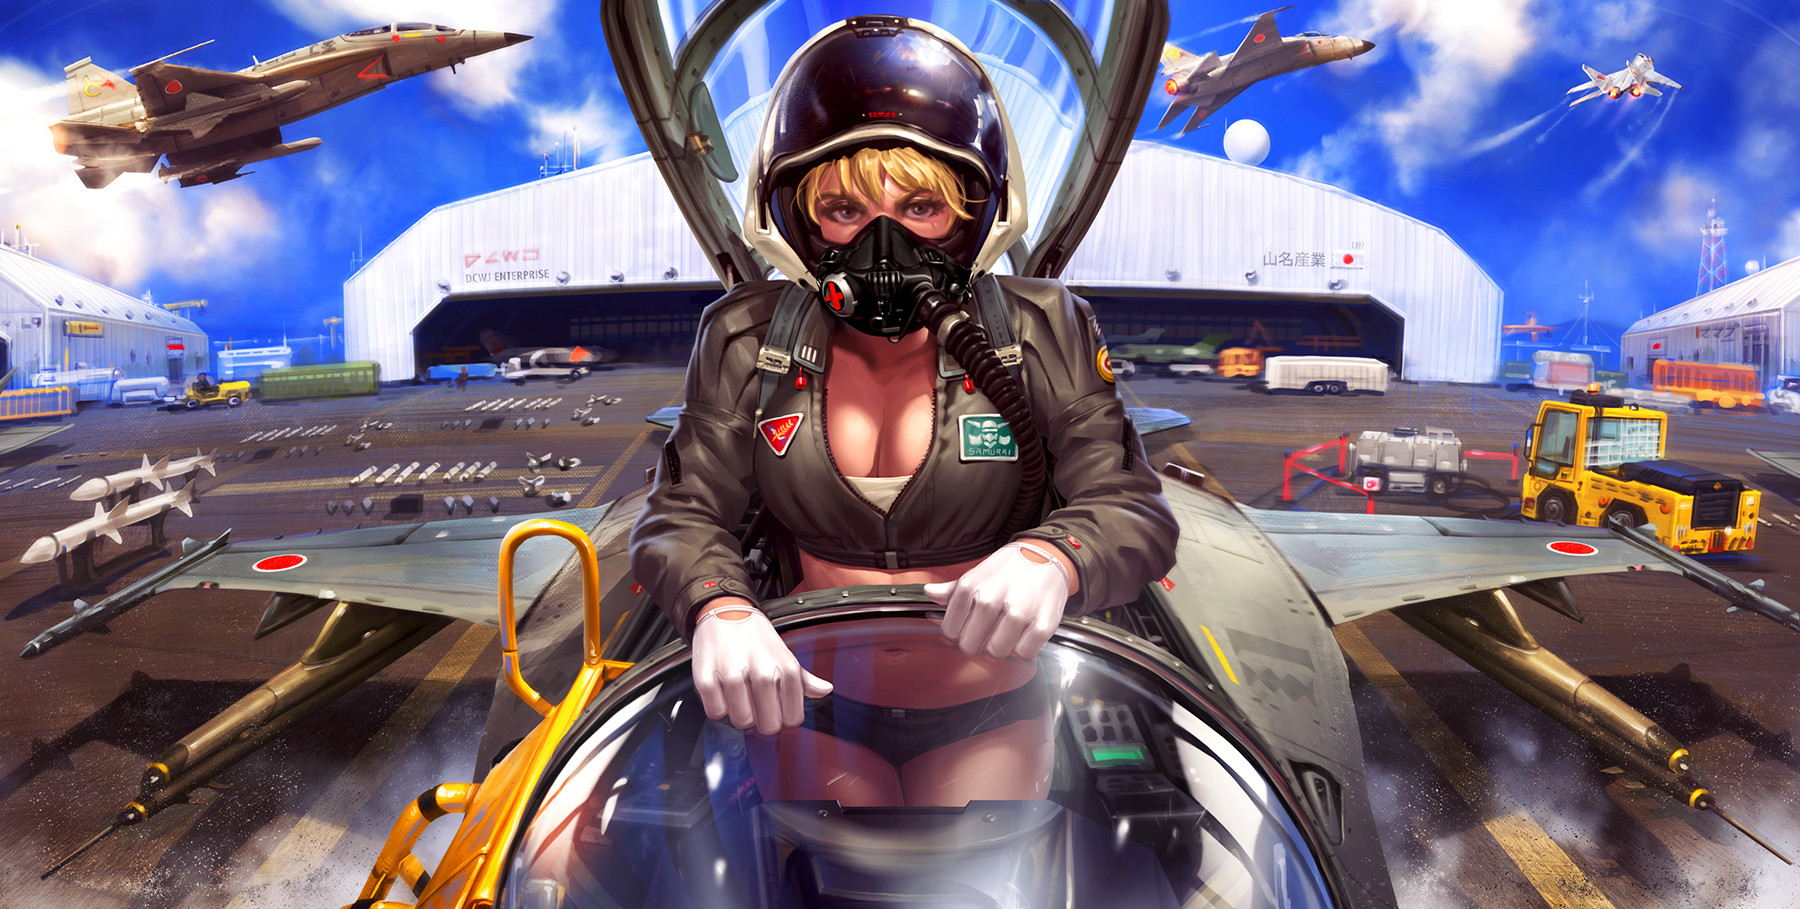 466783 airplane clouds crossover parody fan art original characters  2D spaceship anime long hair BB8 fighter pilot outfit anime girls  field Studio Ghibli brunette Star Wars  Rare Gallery HD Wallpapers